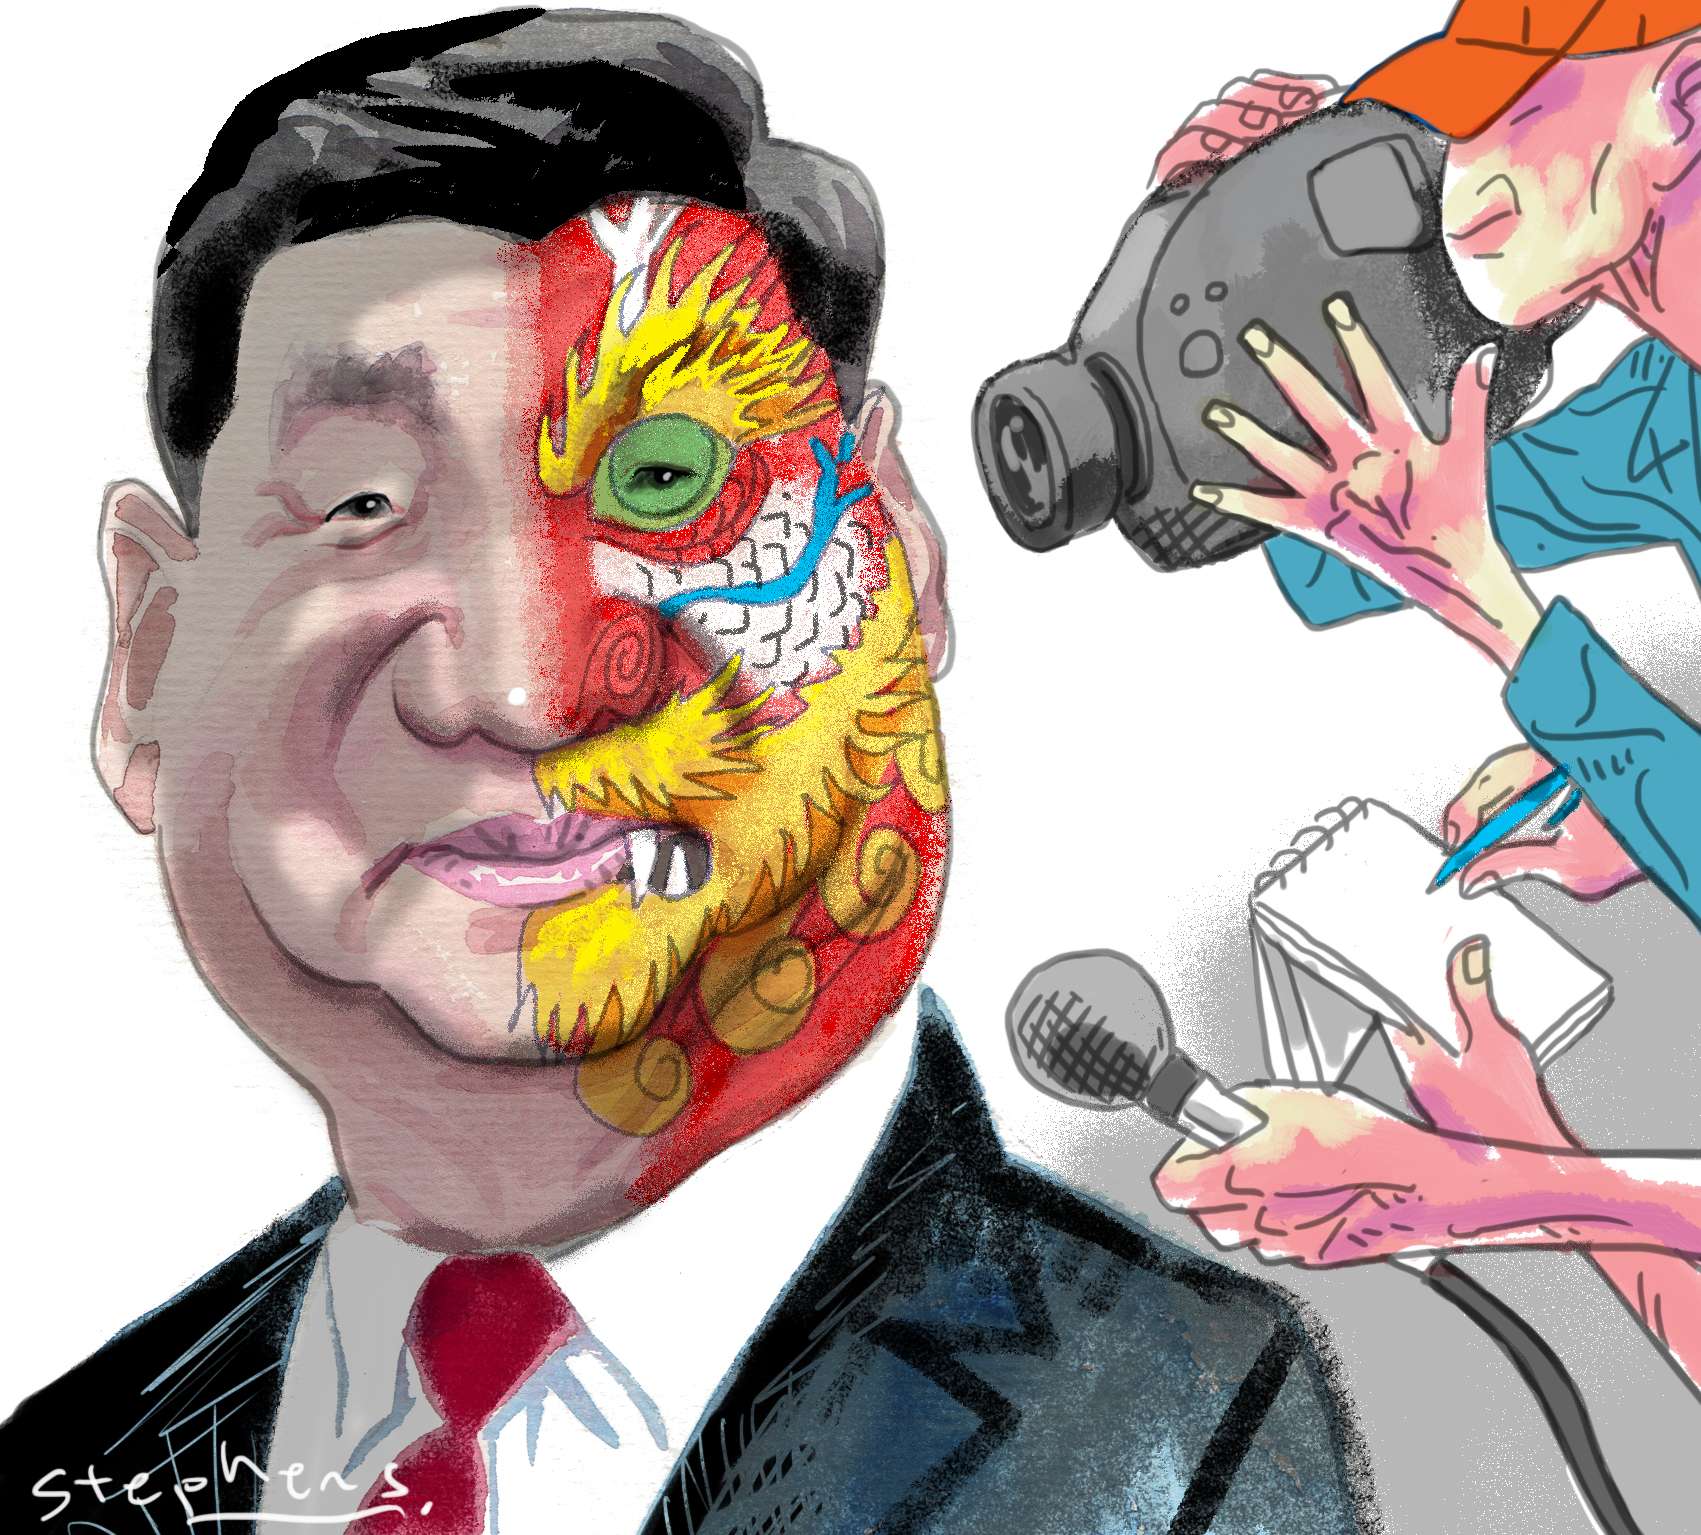 L. K. Cheah says Western journalists who regard China’s motives with suspicion and cynicism are cherry-picking facts based on a biased view, and the misinformation they produce as a result is unhelpful